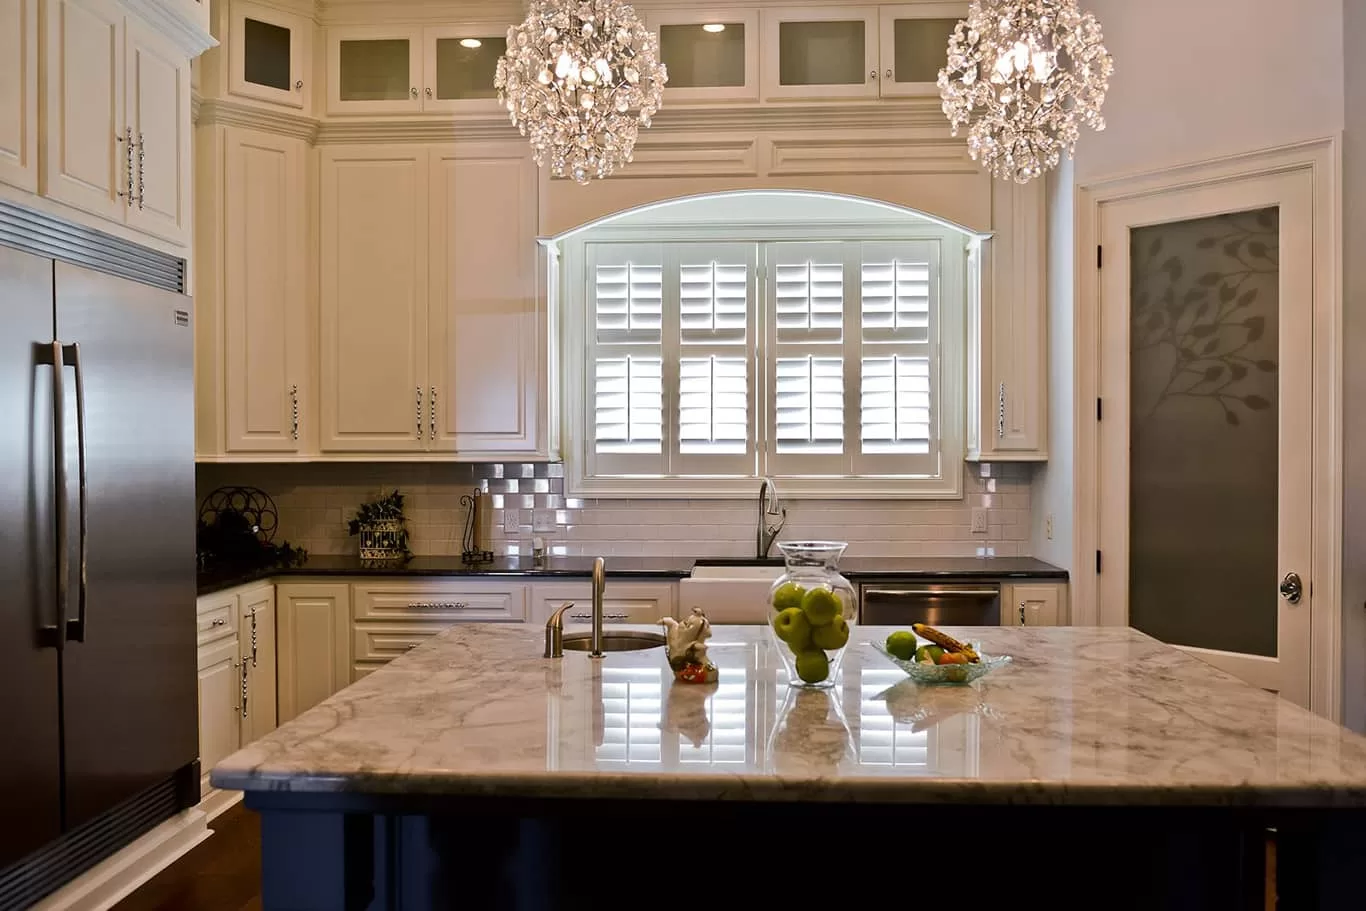 Our Favorite Interior Design Styles to Incorporate Plantation Shutters